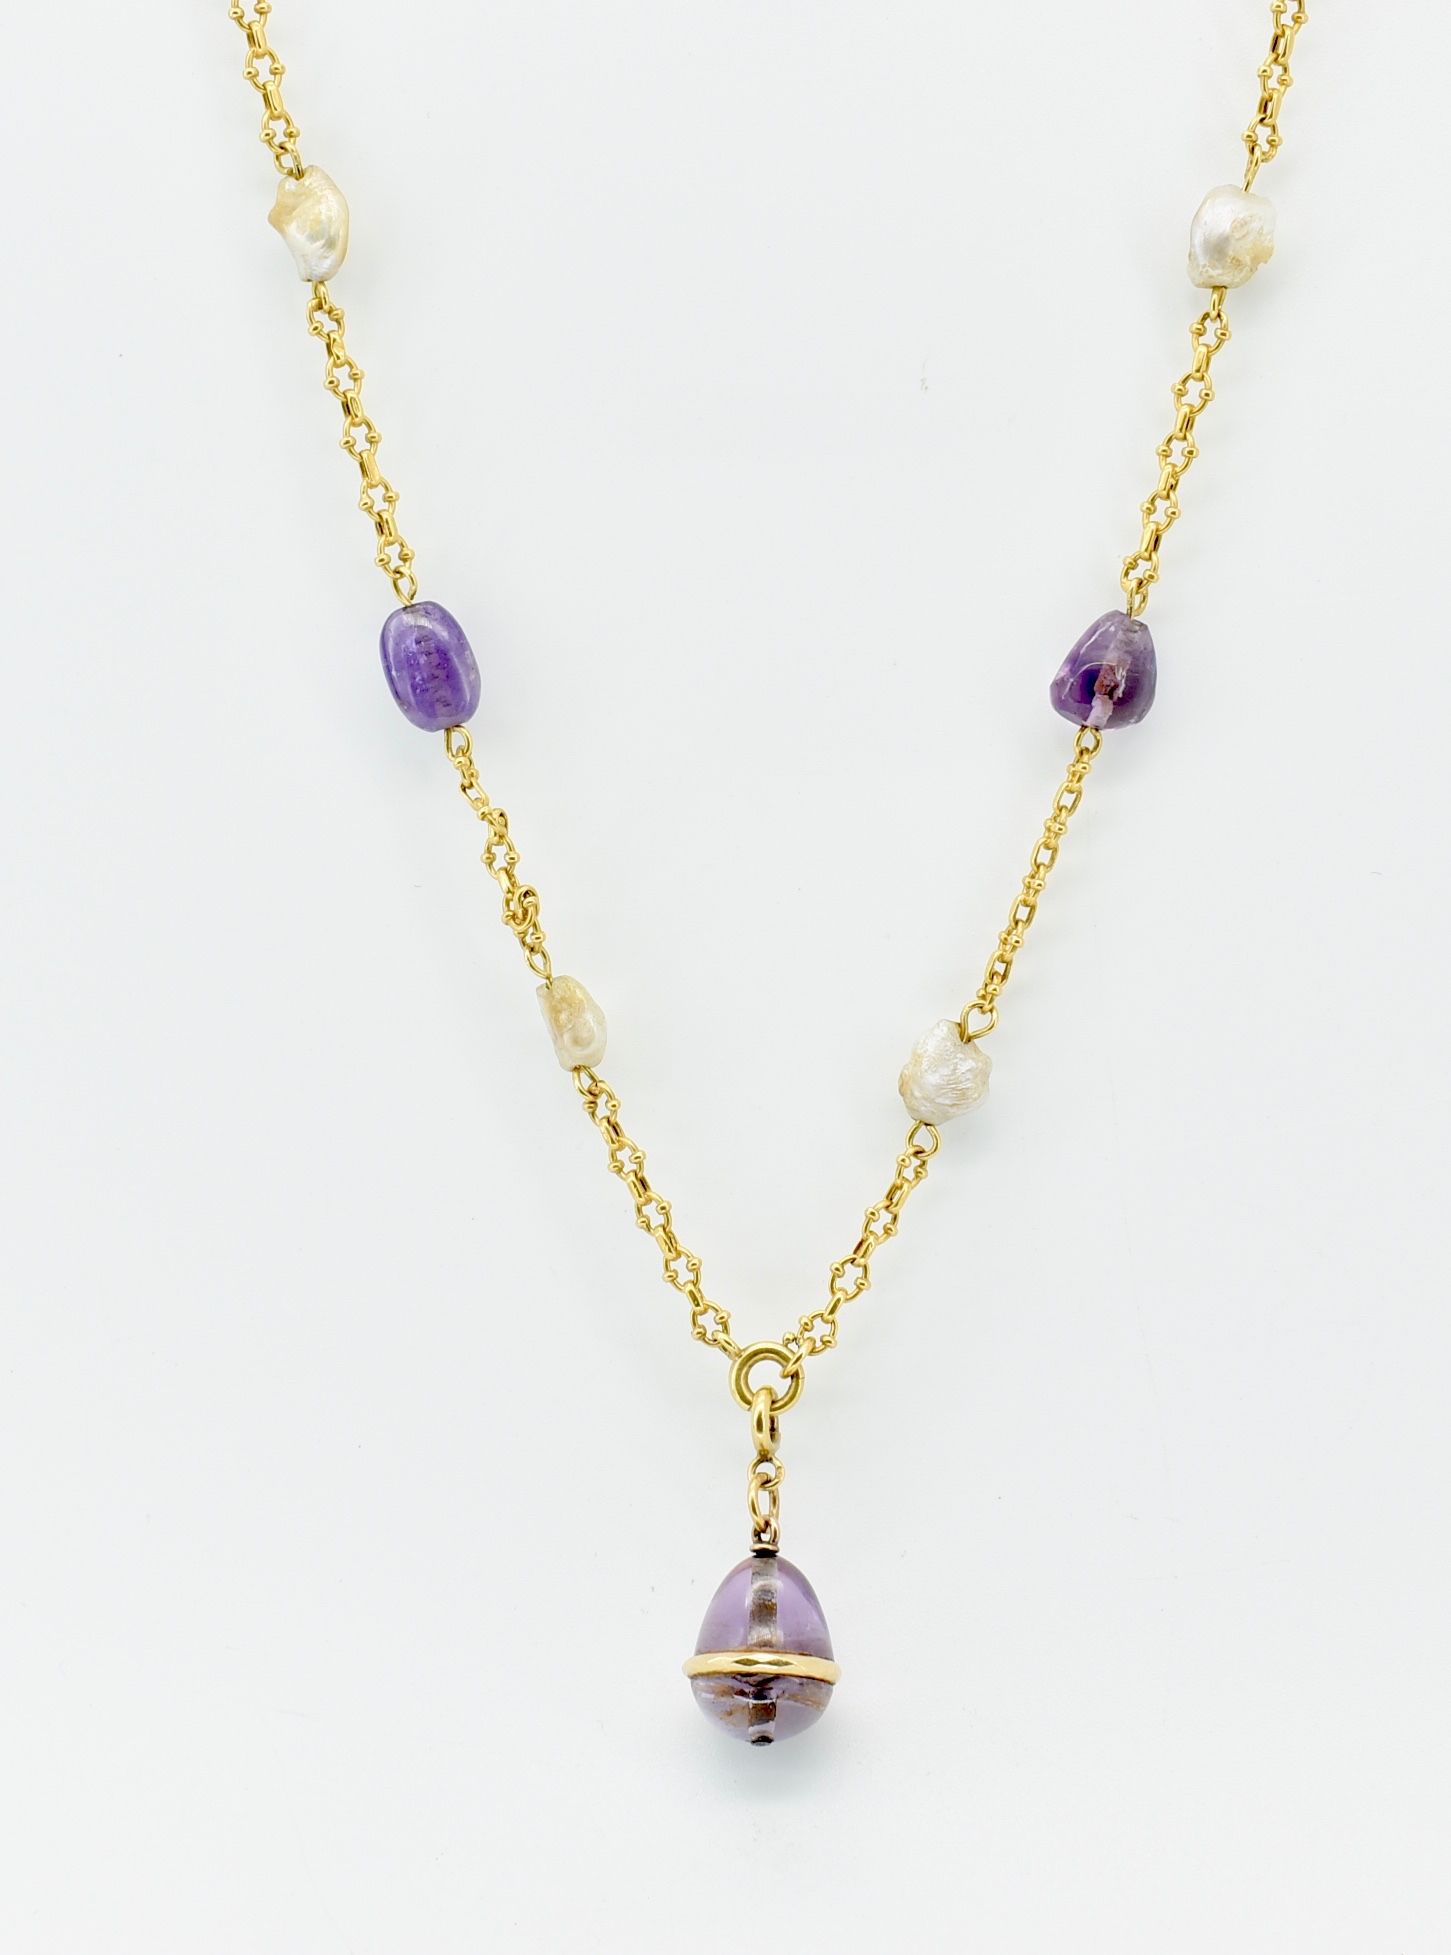 18CT GOLD AMETHYST AND BAROQUE PEARL NECKLACE - Image 4 of 5